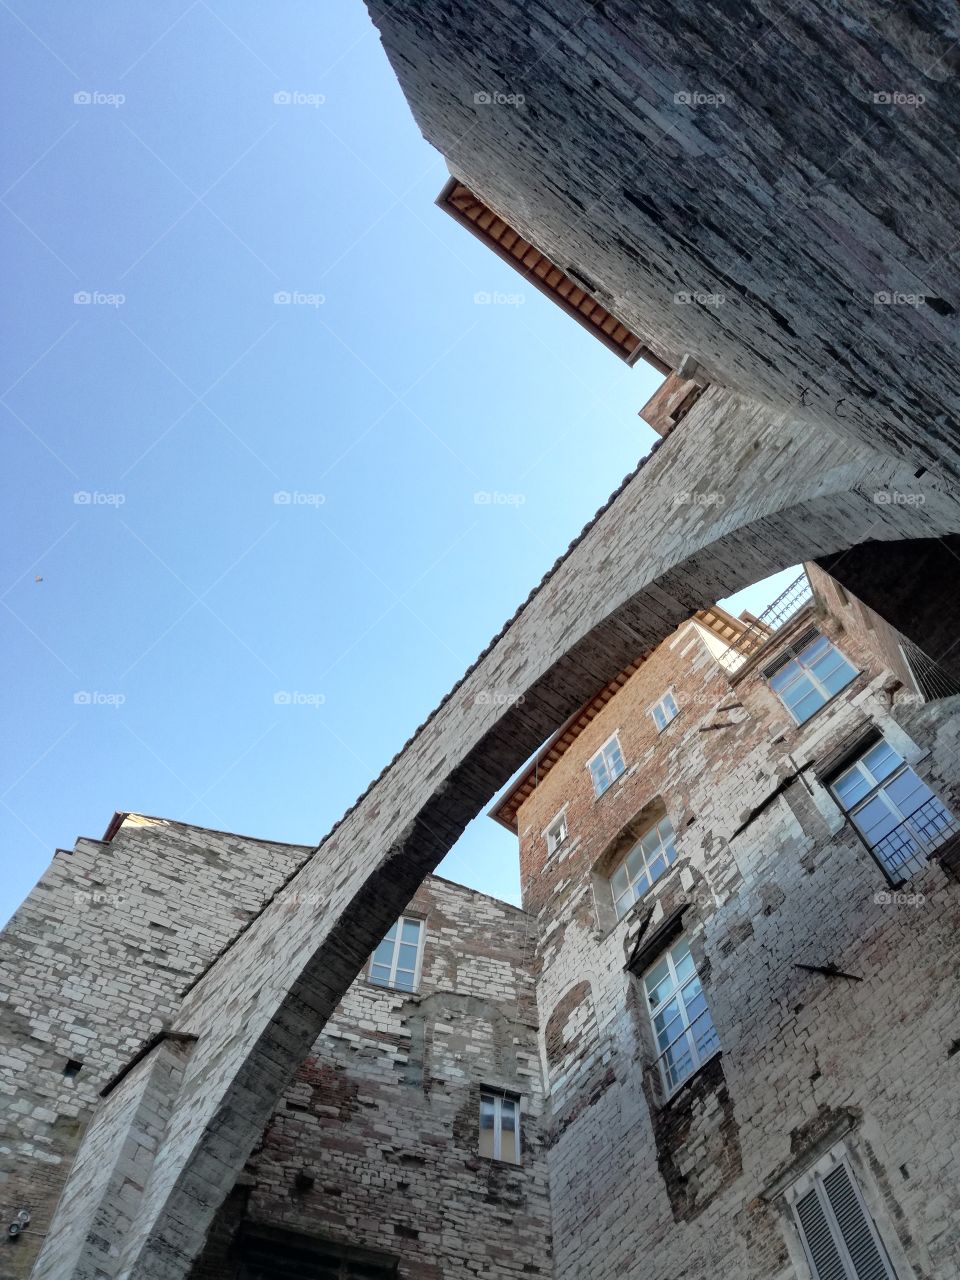 Arch in Perugia. Old town